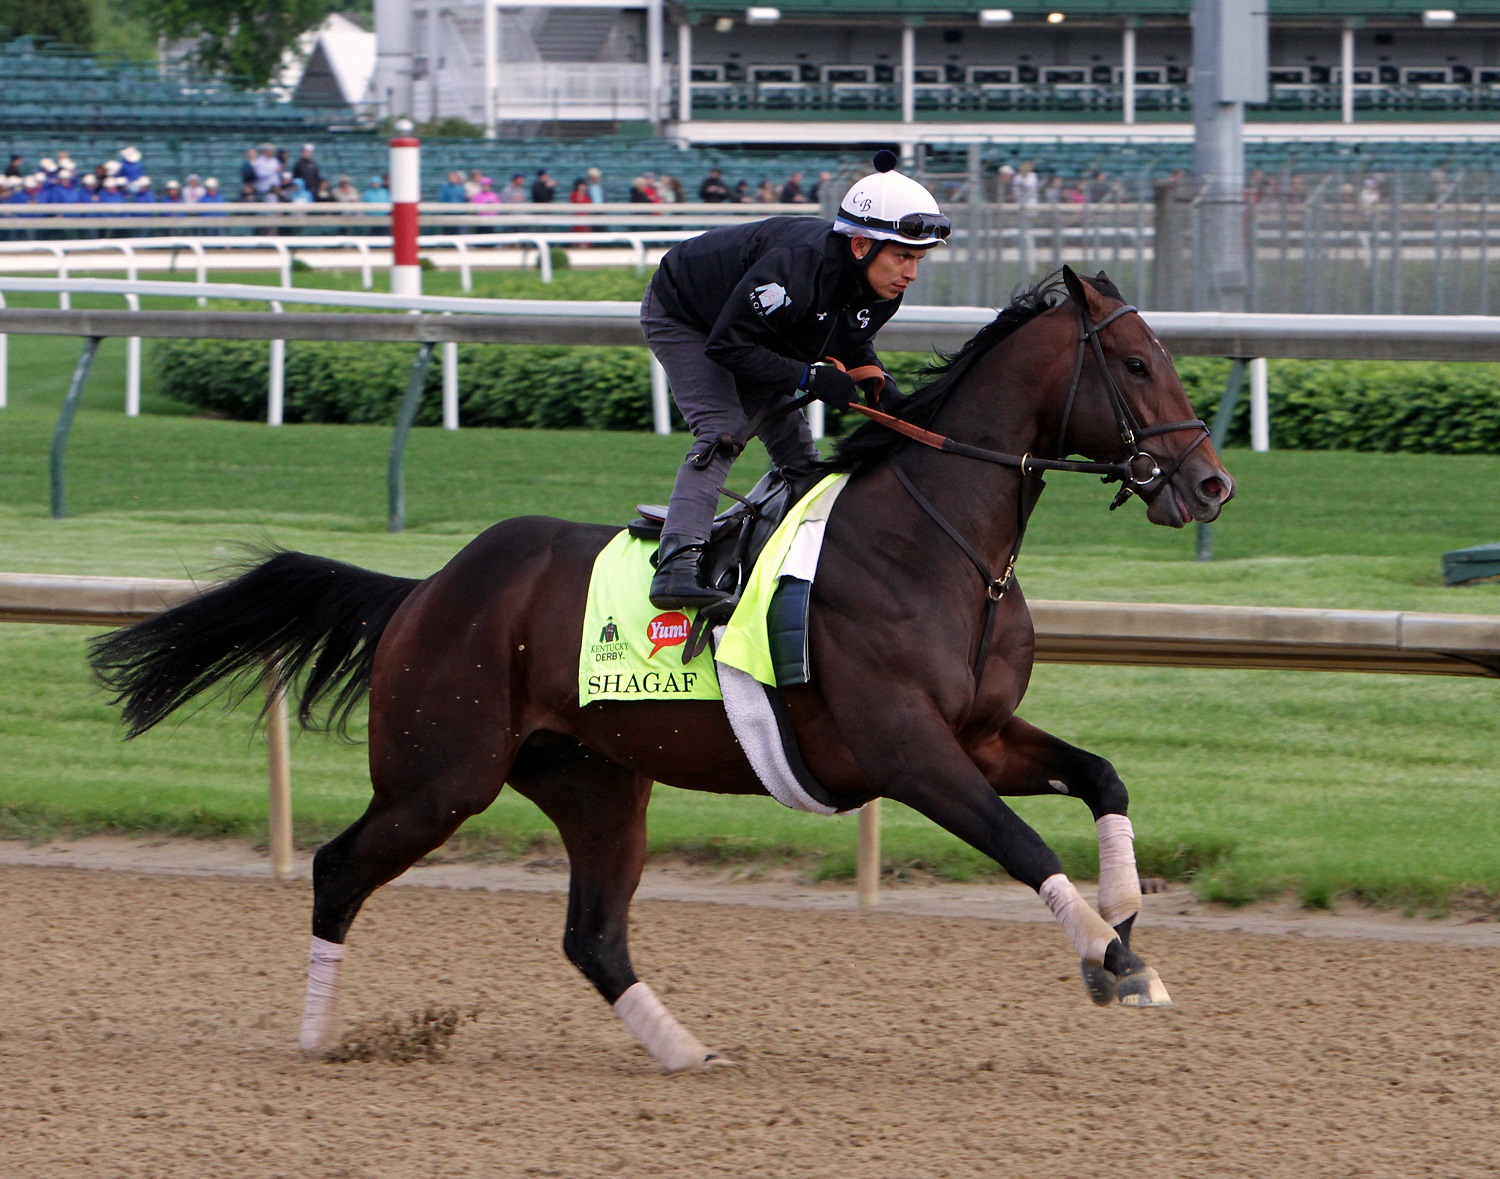 Kentucky Derby entrant Shagaf, ridden by Gian Cueva, gallops at Churchill Downs in Louisville, Ky., Thursday, May 5, 2016. The 142nd Kentucky Derby is Saturday, May 7. (AP Photo/Garry Jones)